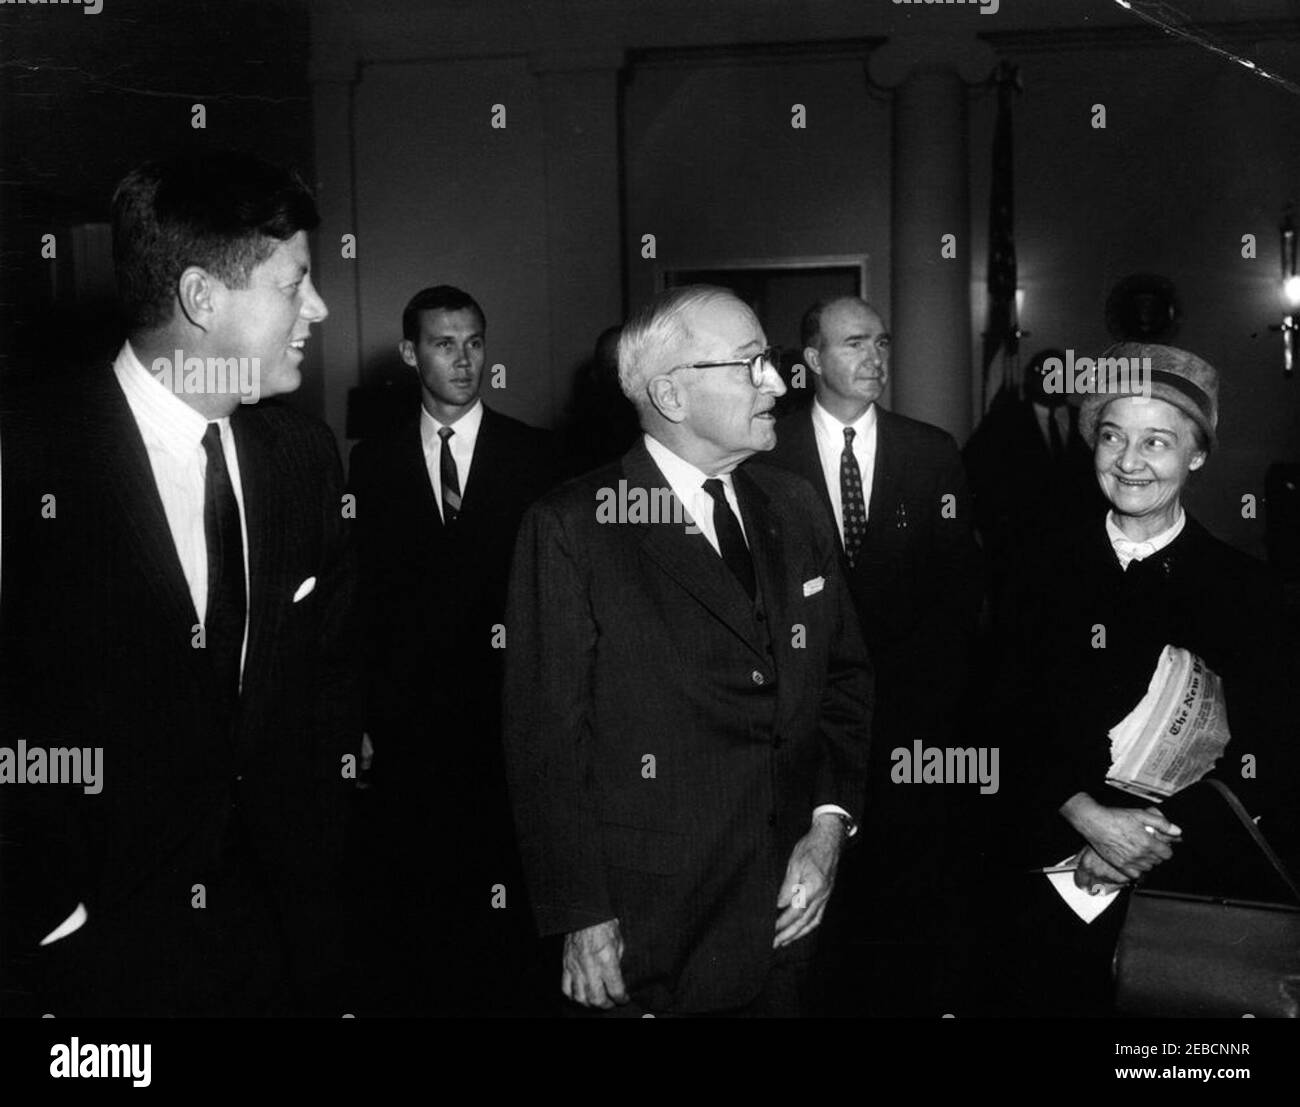 Meeting with former President Harry S. Truman (HST), 9:53AM. President John F. Kennedy stands with former President Harry S. Truman in the West Wing Lobby, White House, Washington, D.C. (L-R) President Kennedy; Secret Service agent William u0022Billu0022 Duncan; President Truman; Special Assistant to President Kennedy Dave Powers; Washington Correspondent for the Guy Gannett Publishing Company of Maine, May Craig. Stock Photo